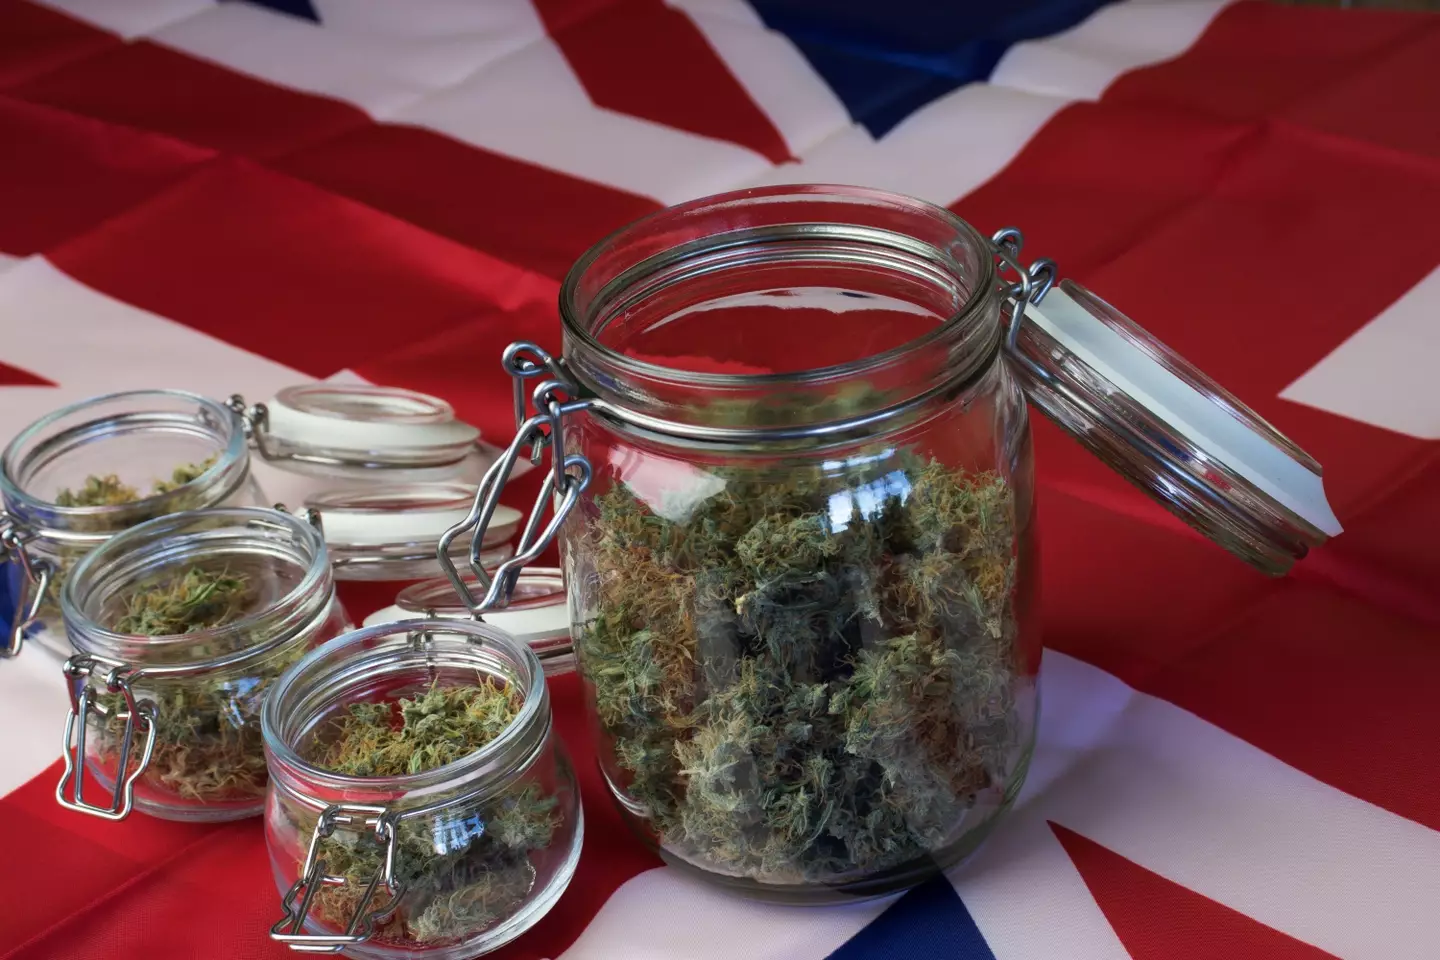 The UK legalised the use of medical cannabis back in 2018.